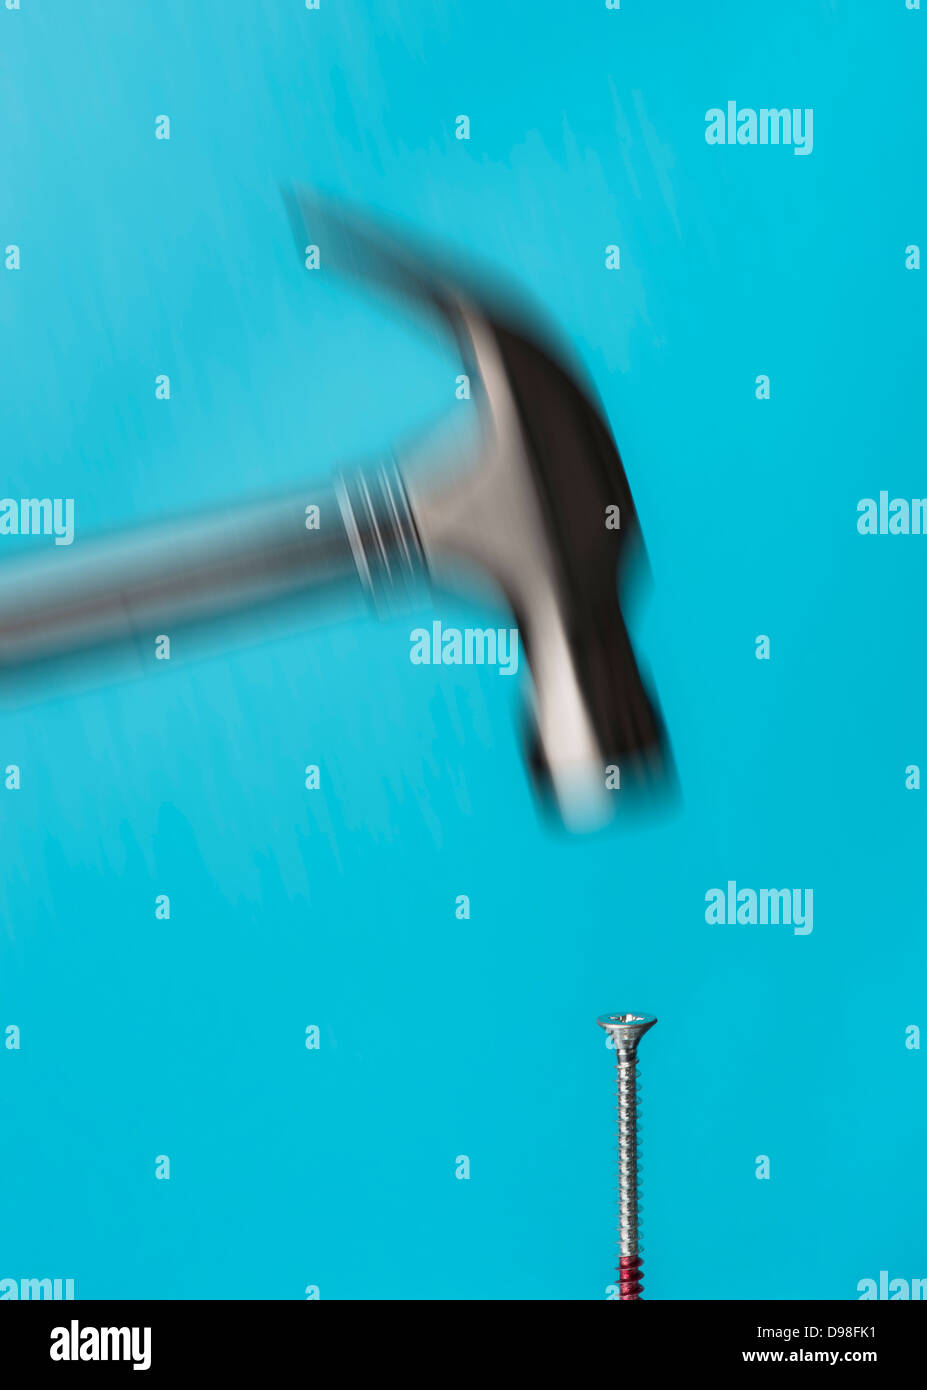 Blurred motion of hammer hitting a screw Stock Photo